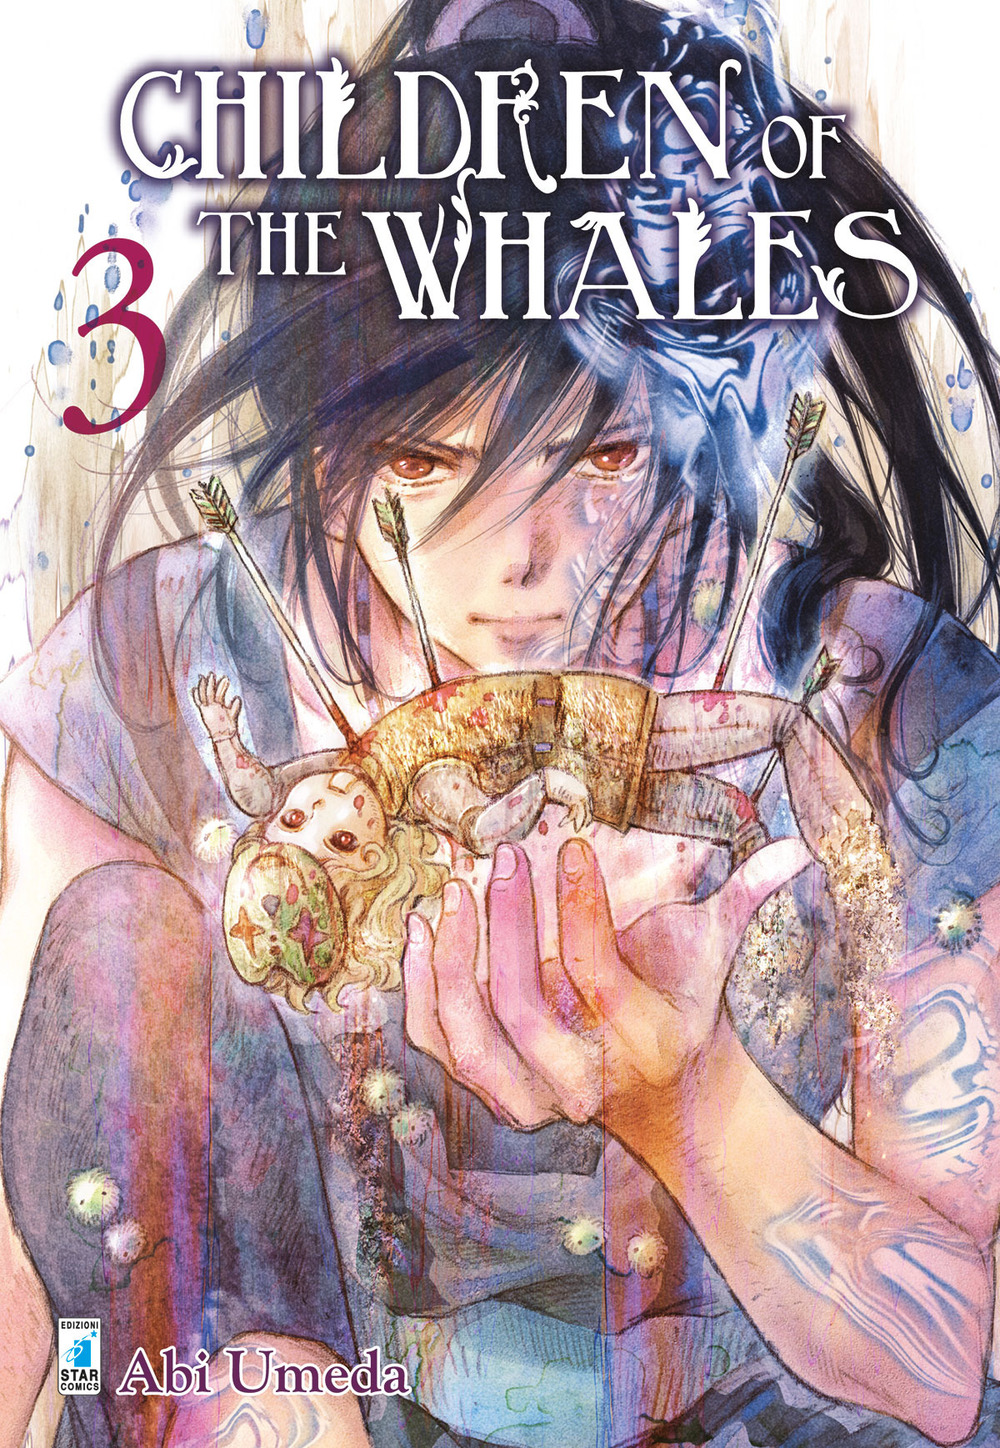 Children of the whales. Vol. 3